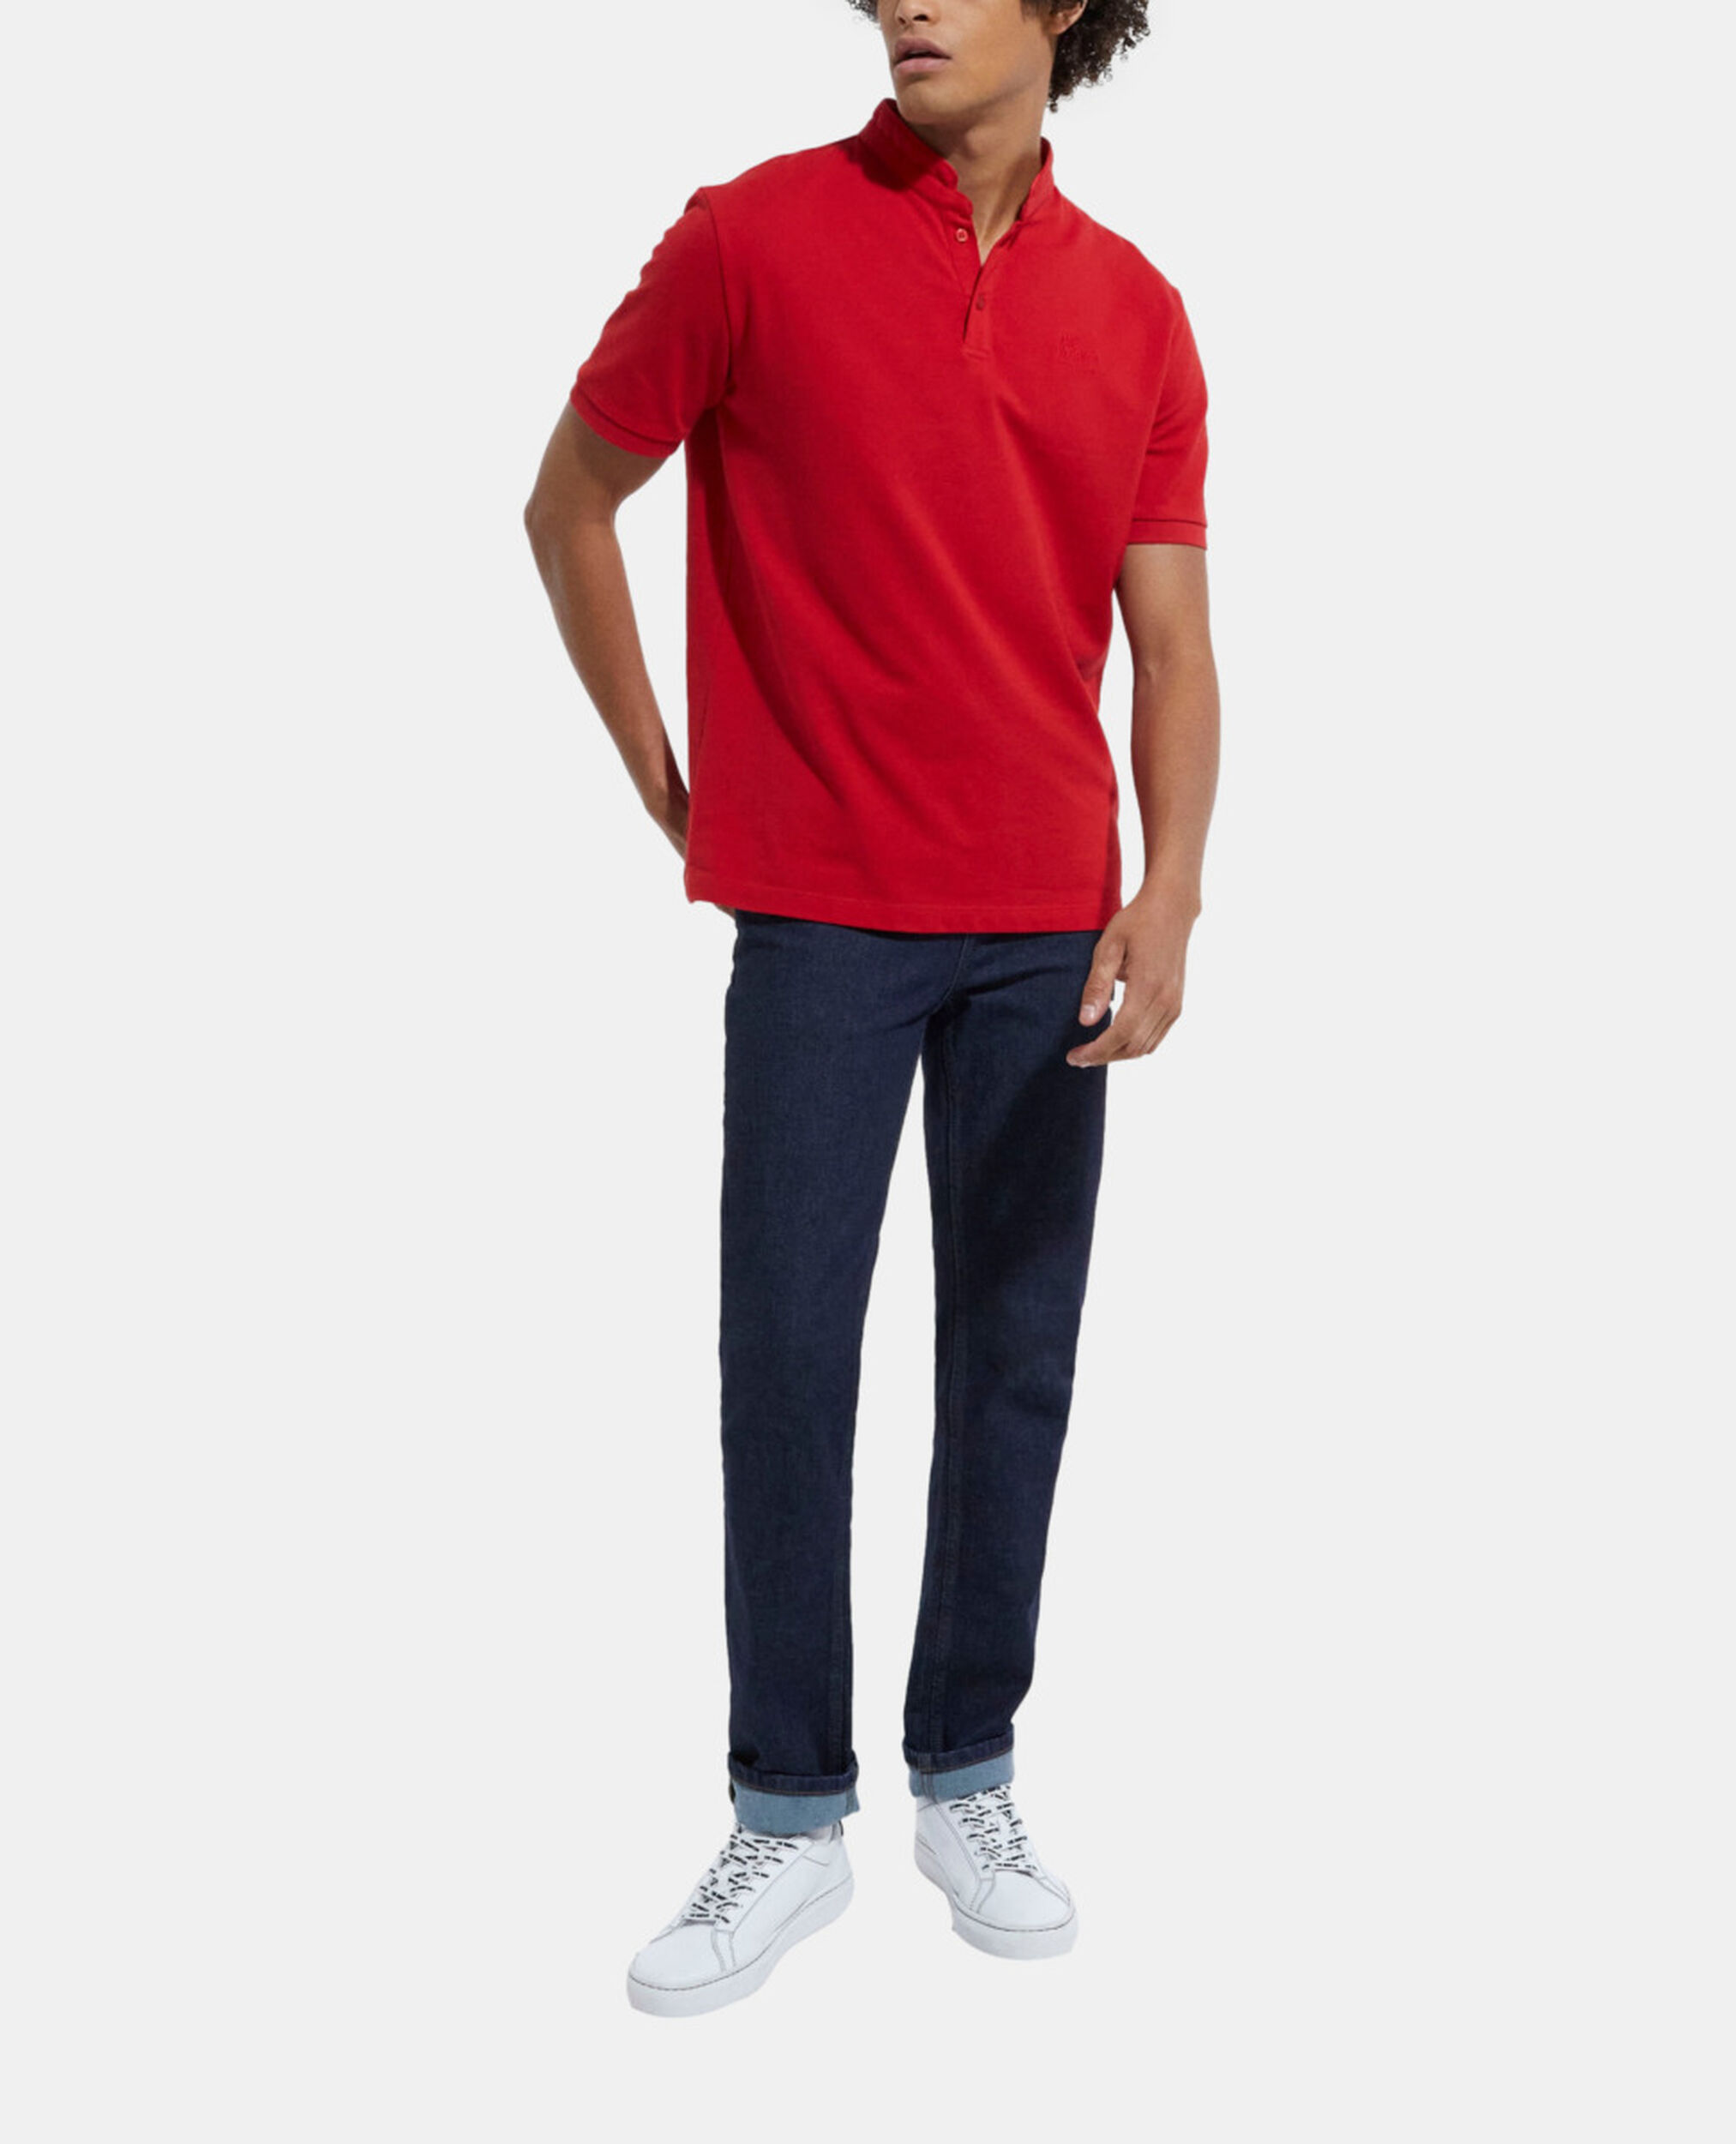 Rotes Poloshirt, TANGO RED, hi-res image number null